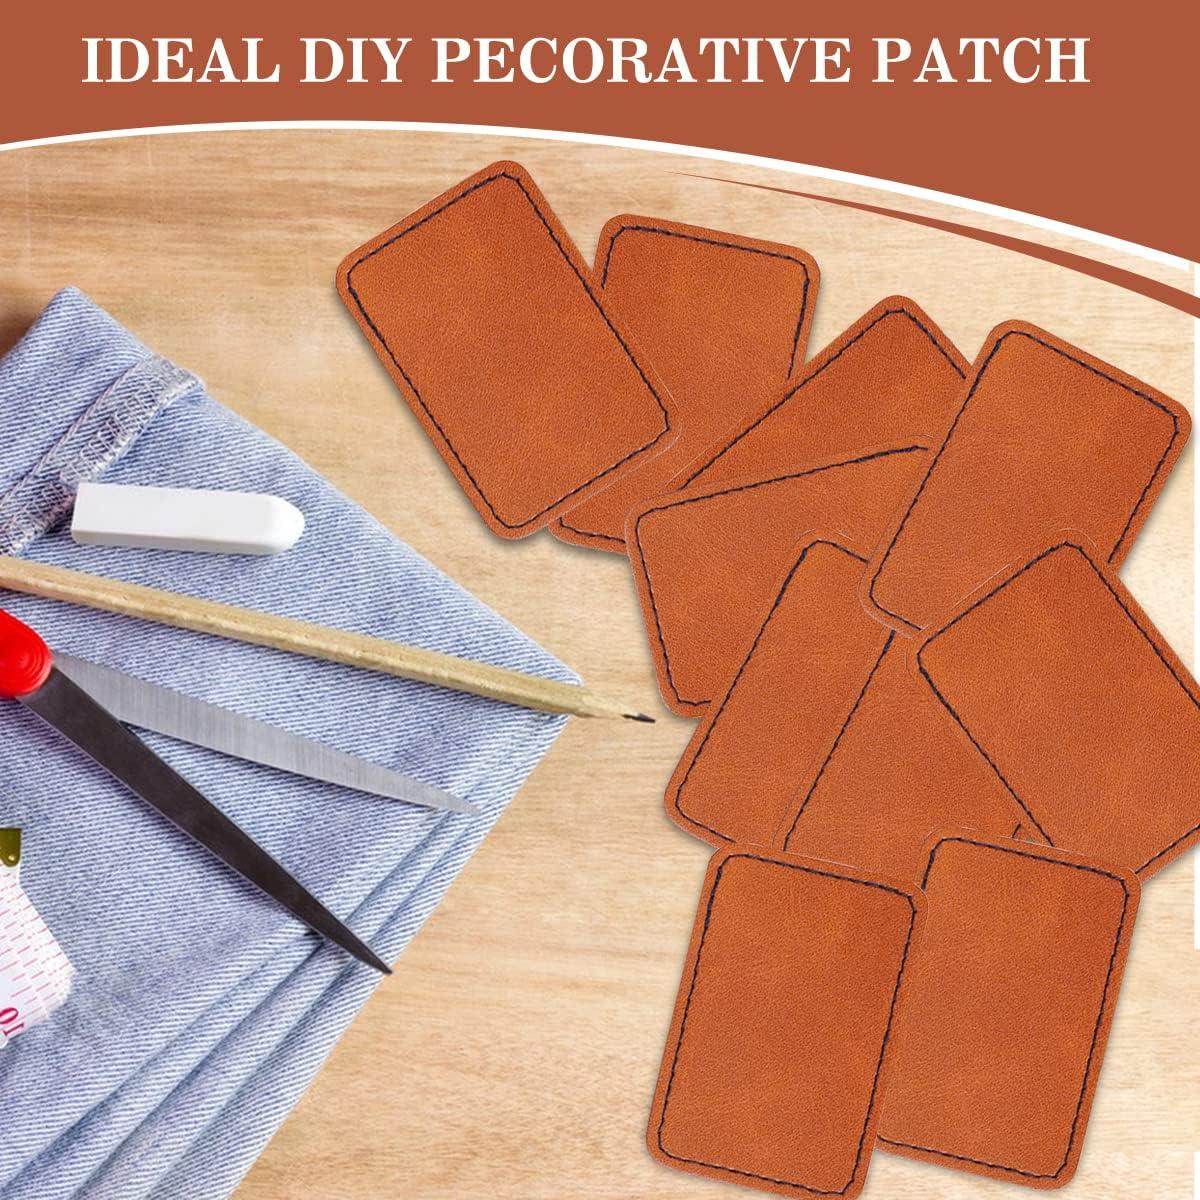 Blank Leatherette Patch with Adhesive